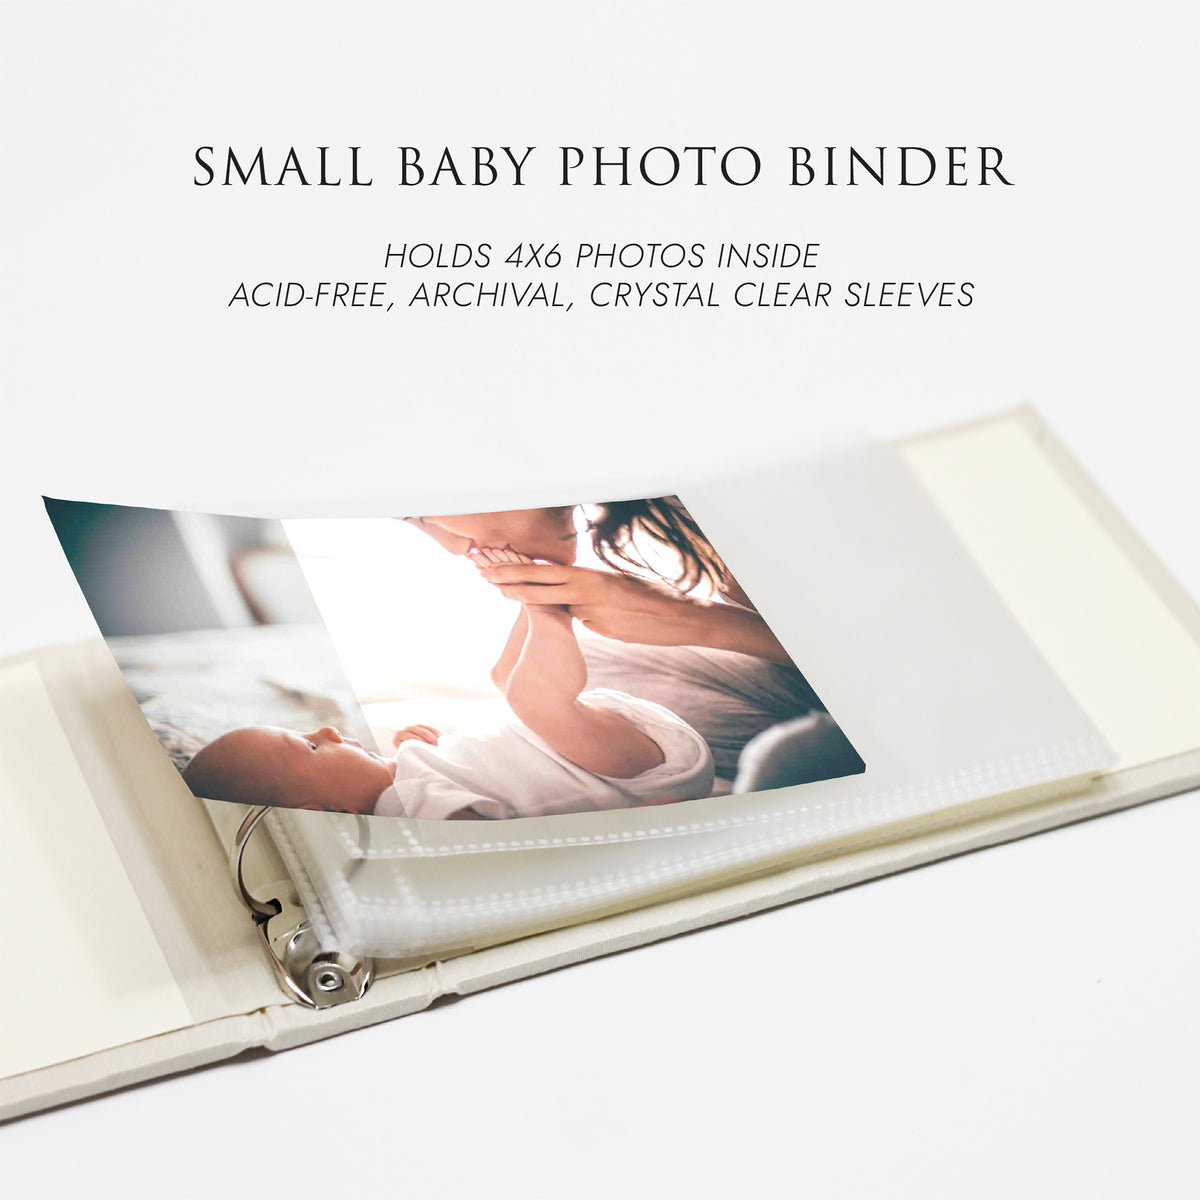 Small Baby Photo Binder | for 4x6 Photos | with Amethyst Silk | Includes BABY Title On Cover